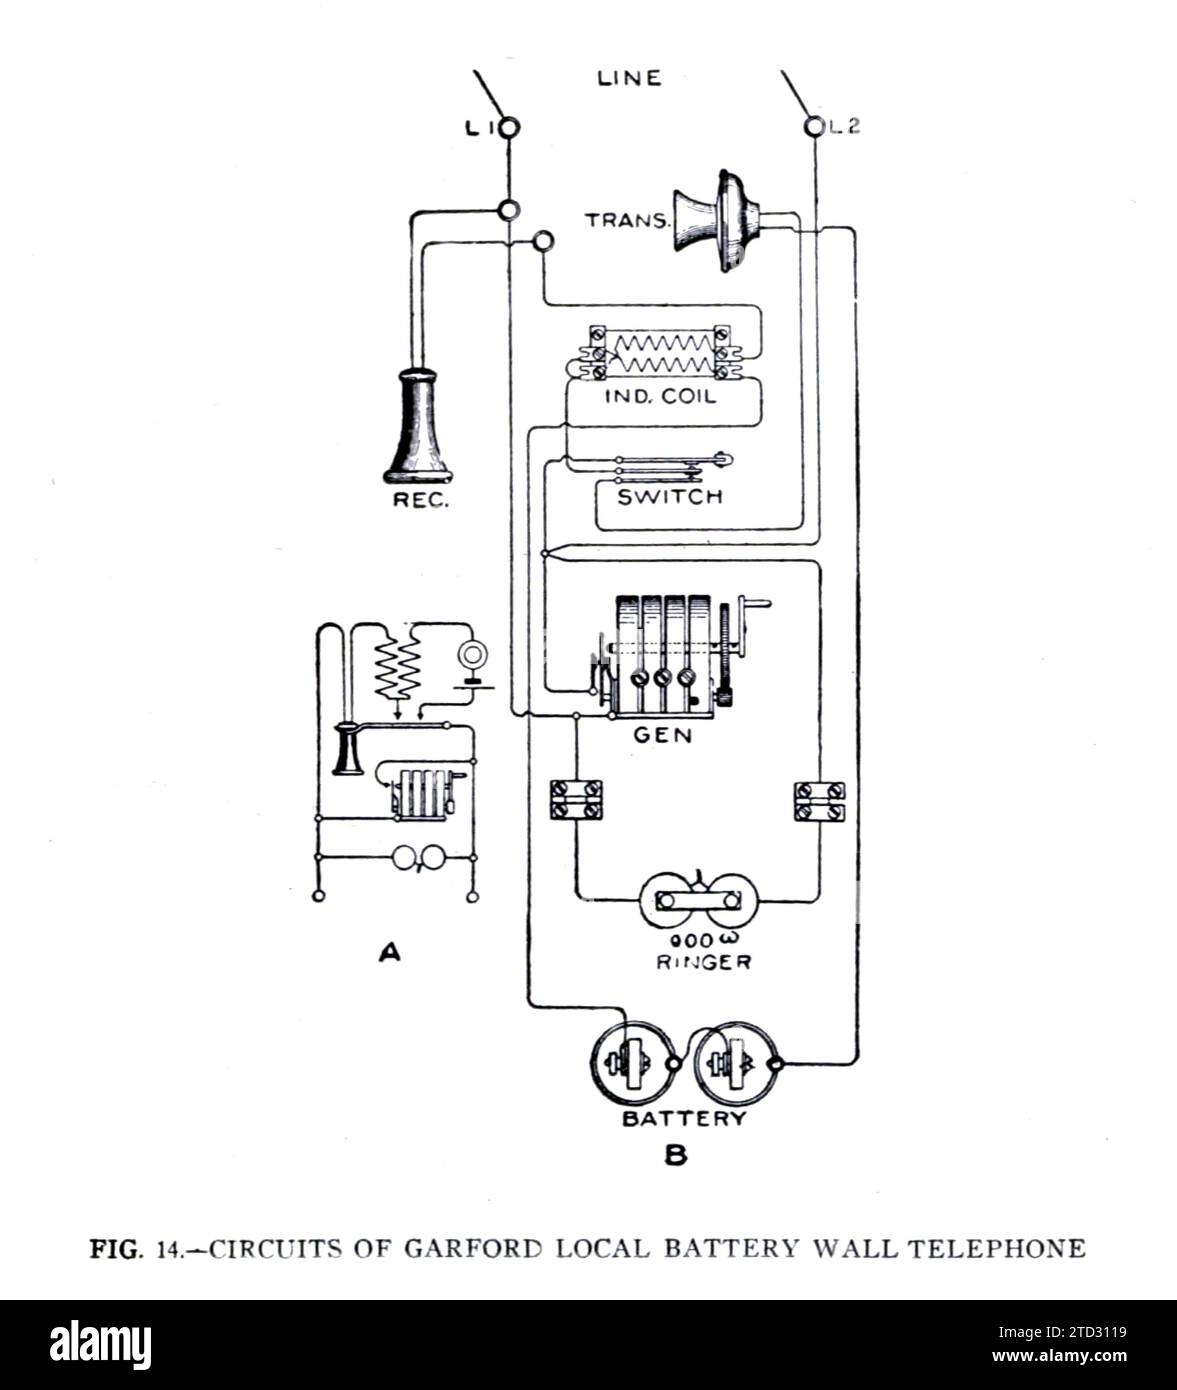 Garford local battery wall telephone circuits, illustration. From 'Military Signal Corps manual' by James Andrew White, publication date 1918. Stock Photo